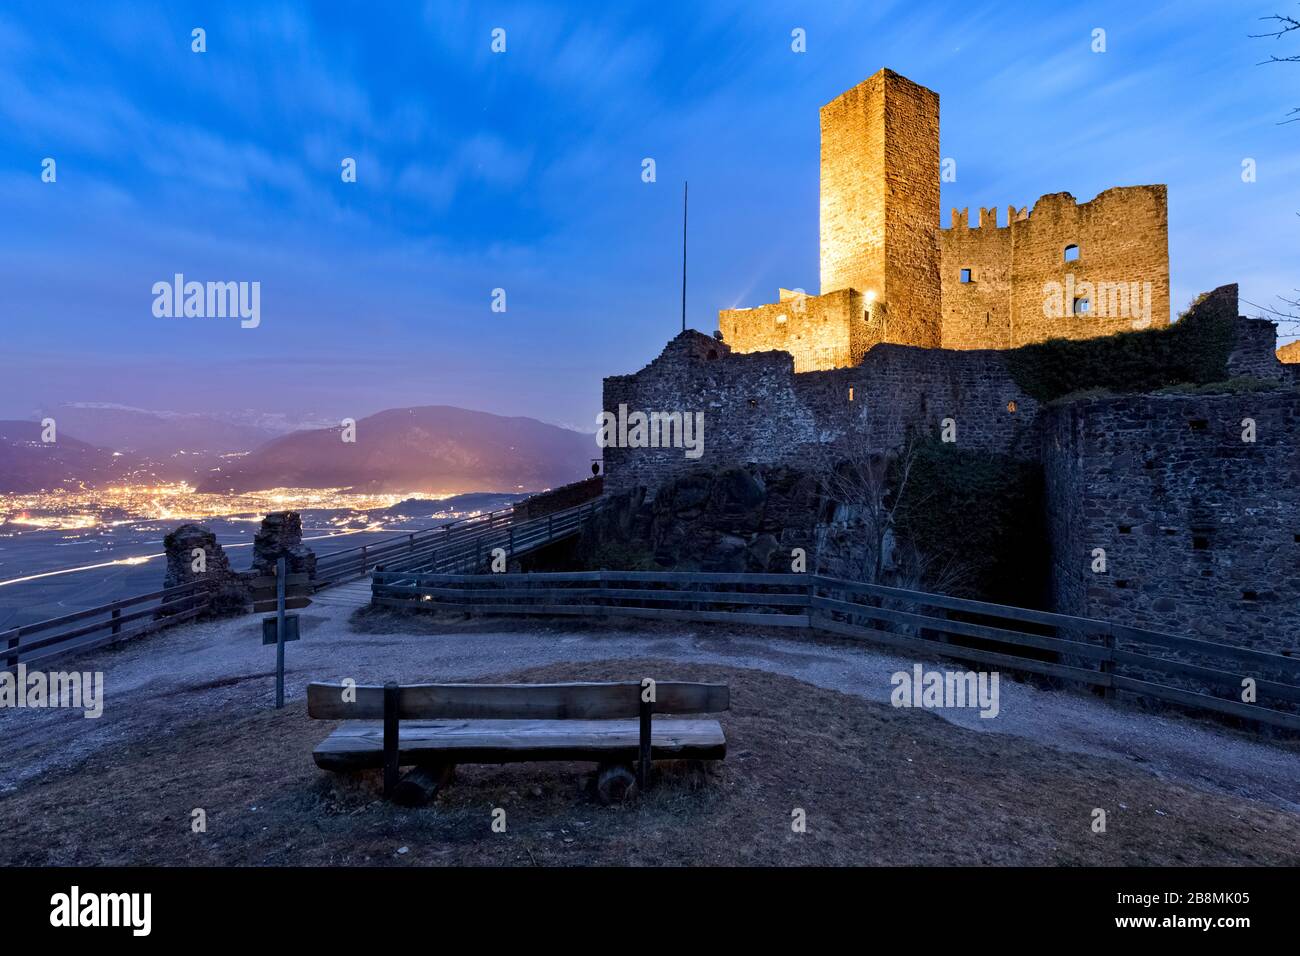 The Appiano Castle is one of the most impressive fortresses in South Tyrol. In the background the Adige valley and the city of Bolzano. Italy. Stock Photo